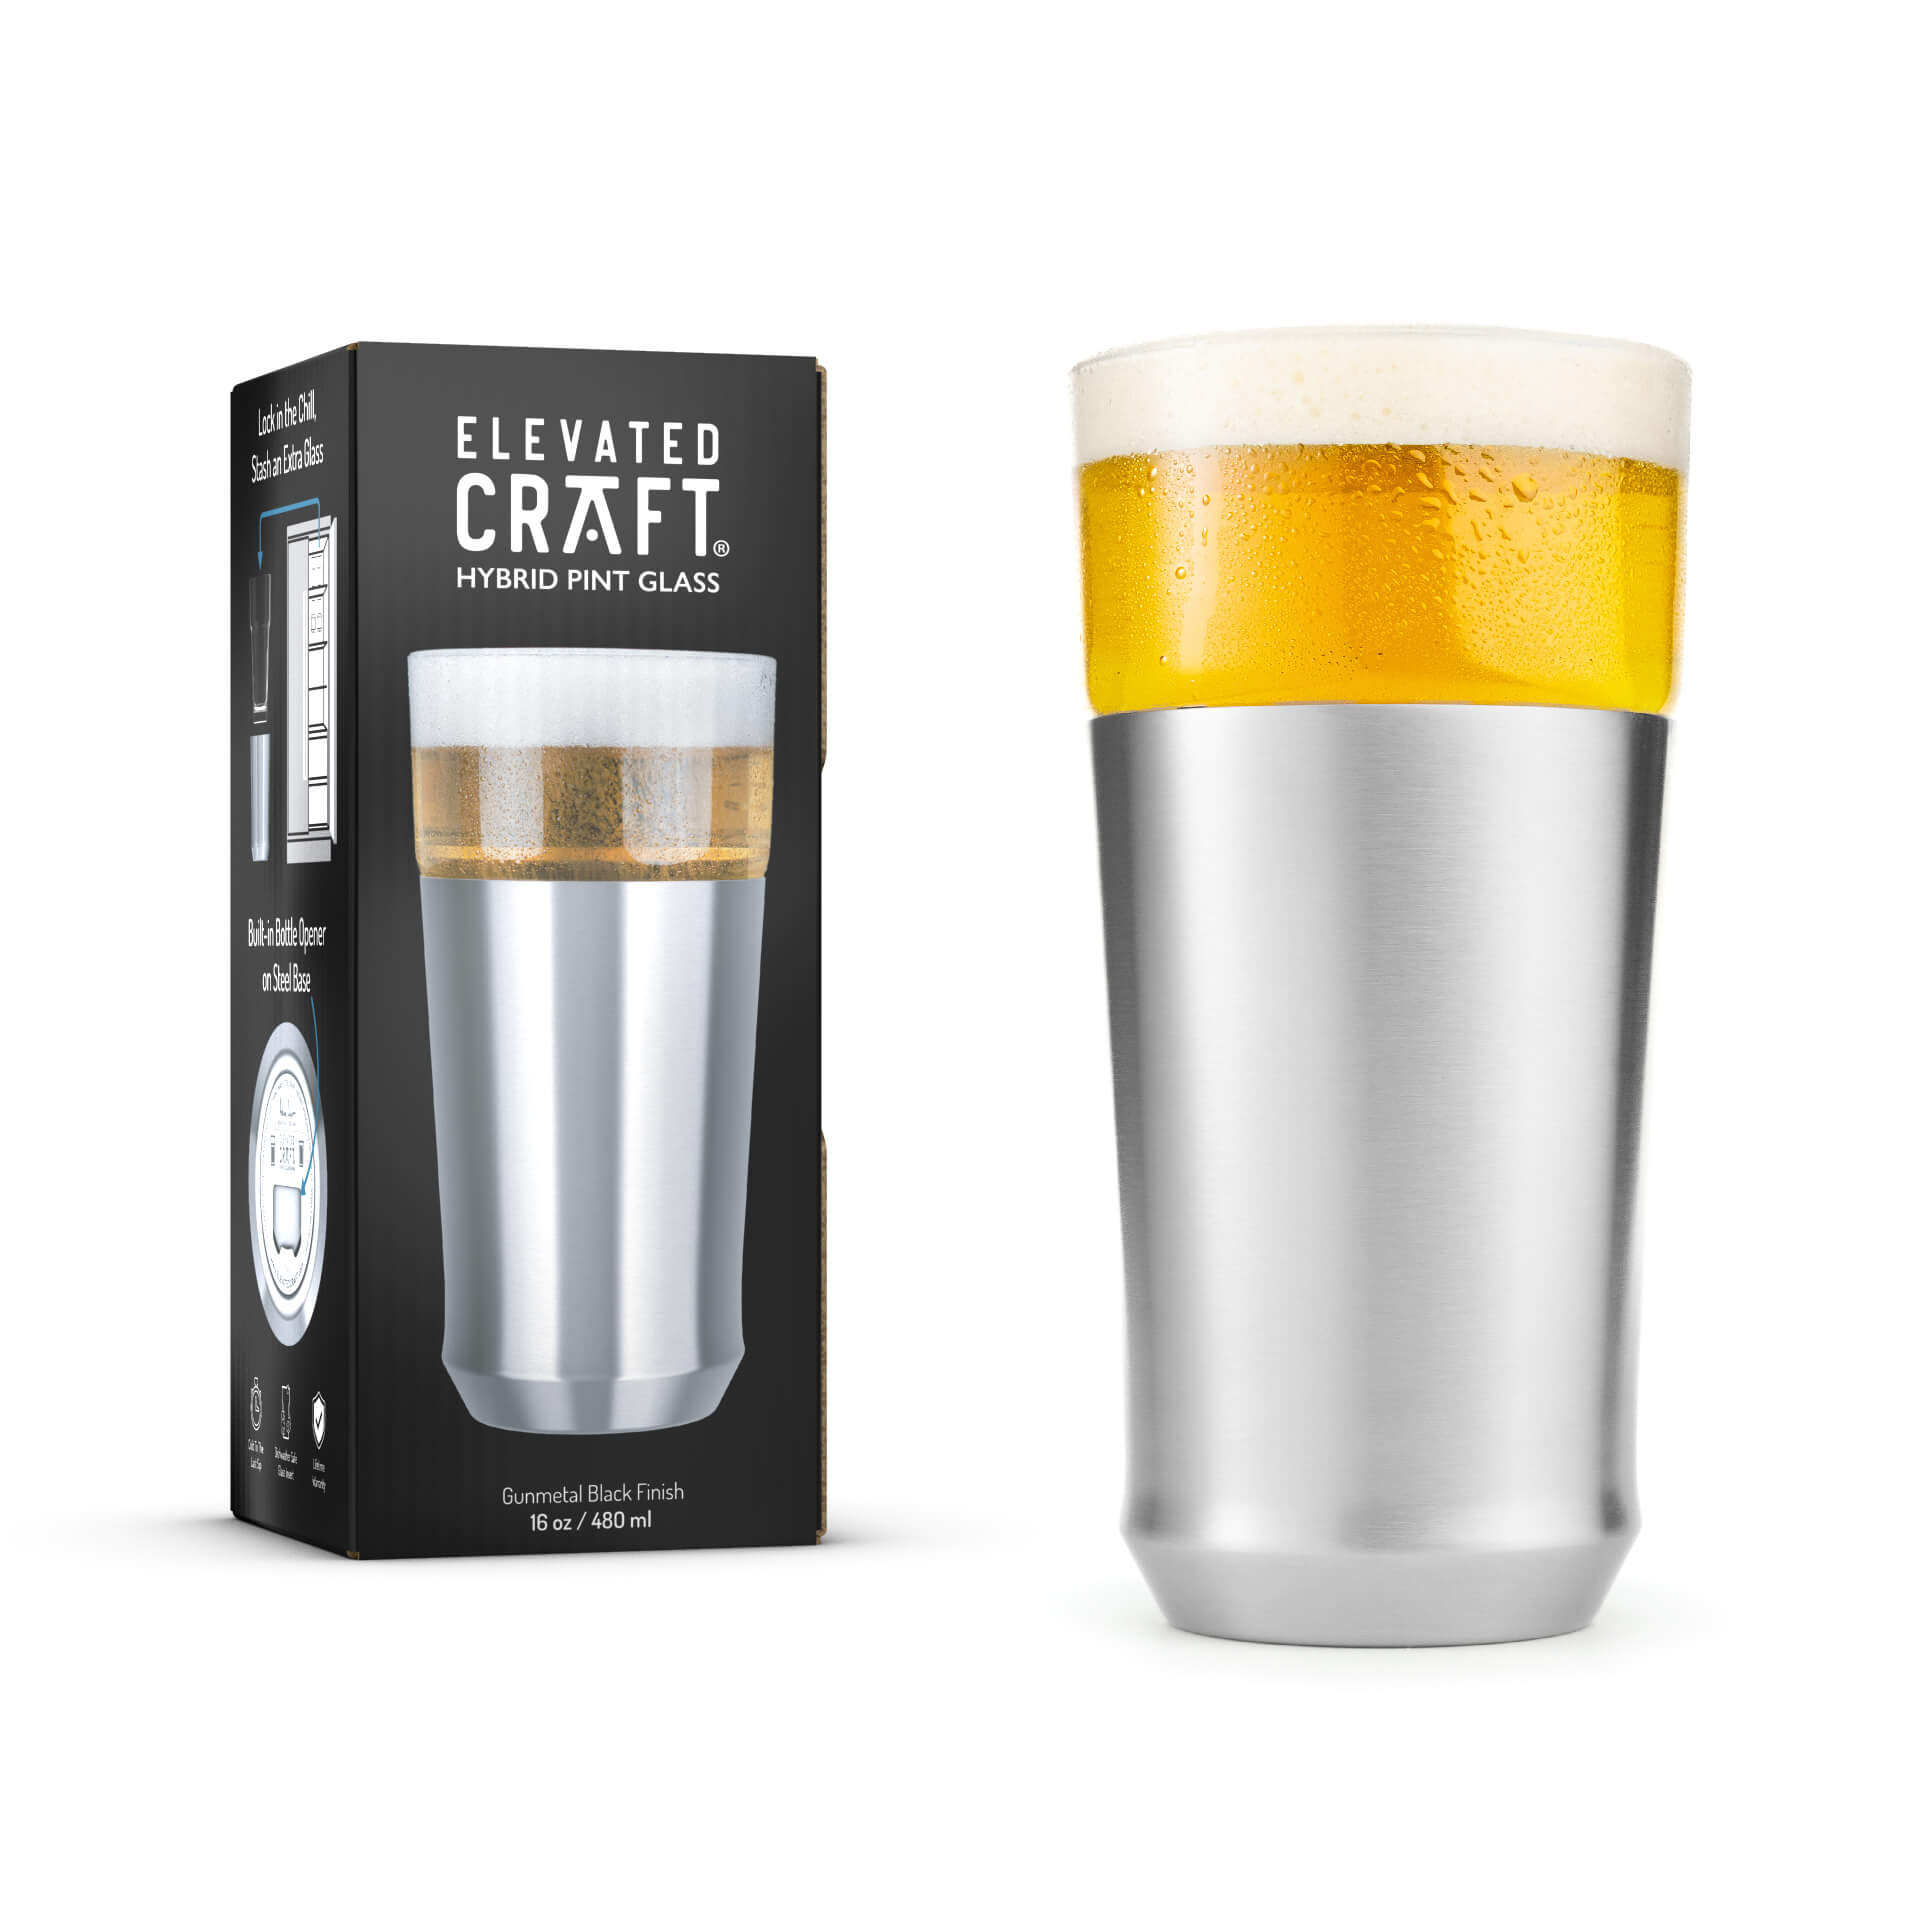 True Stainless Steel Pint Glasses For Beer, Iced Coffee, Water, Or